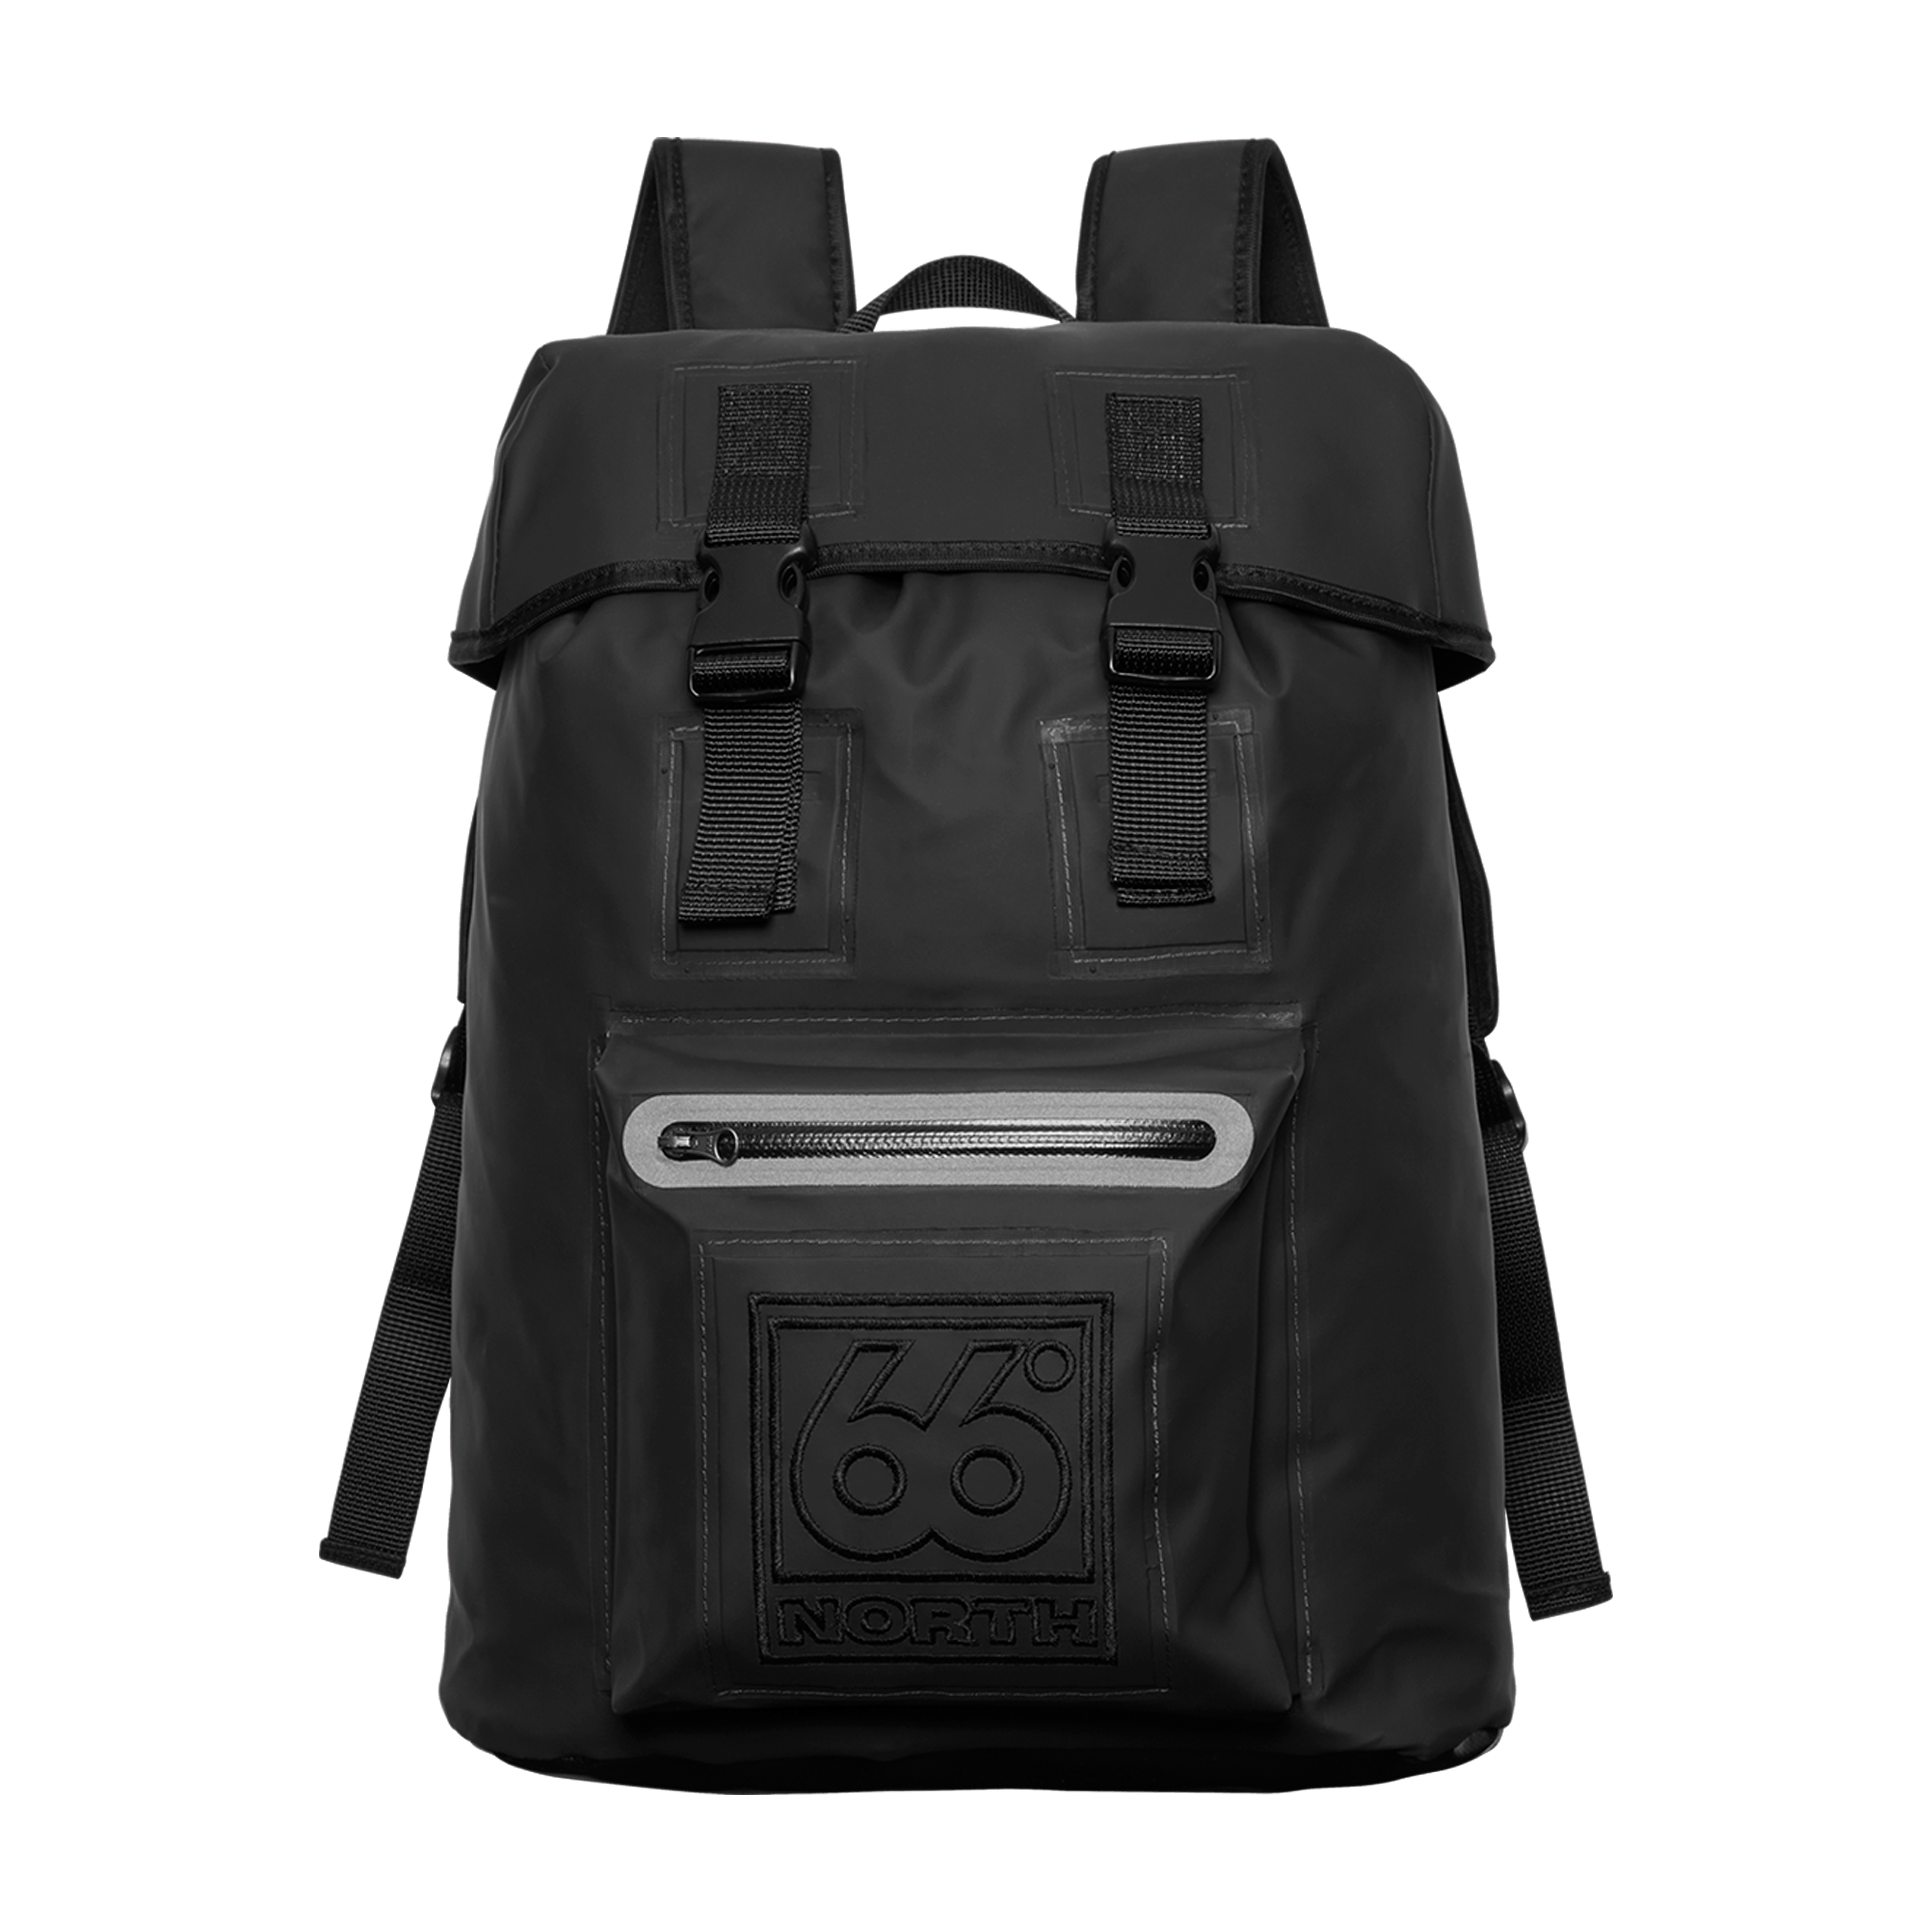 66 North Womens Backpack Accessories - Black - One Size